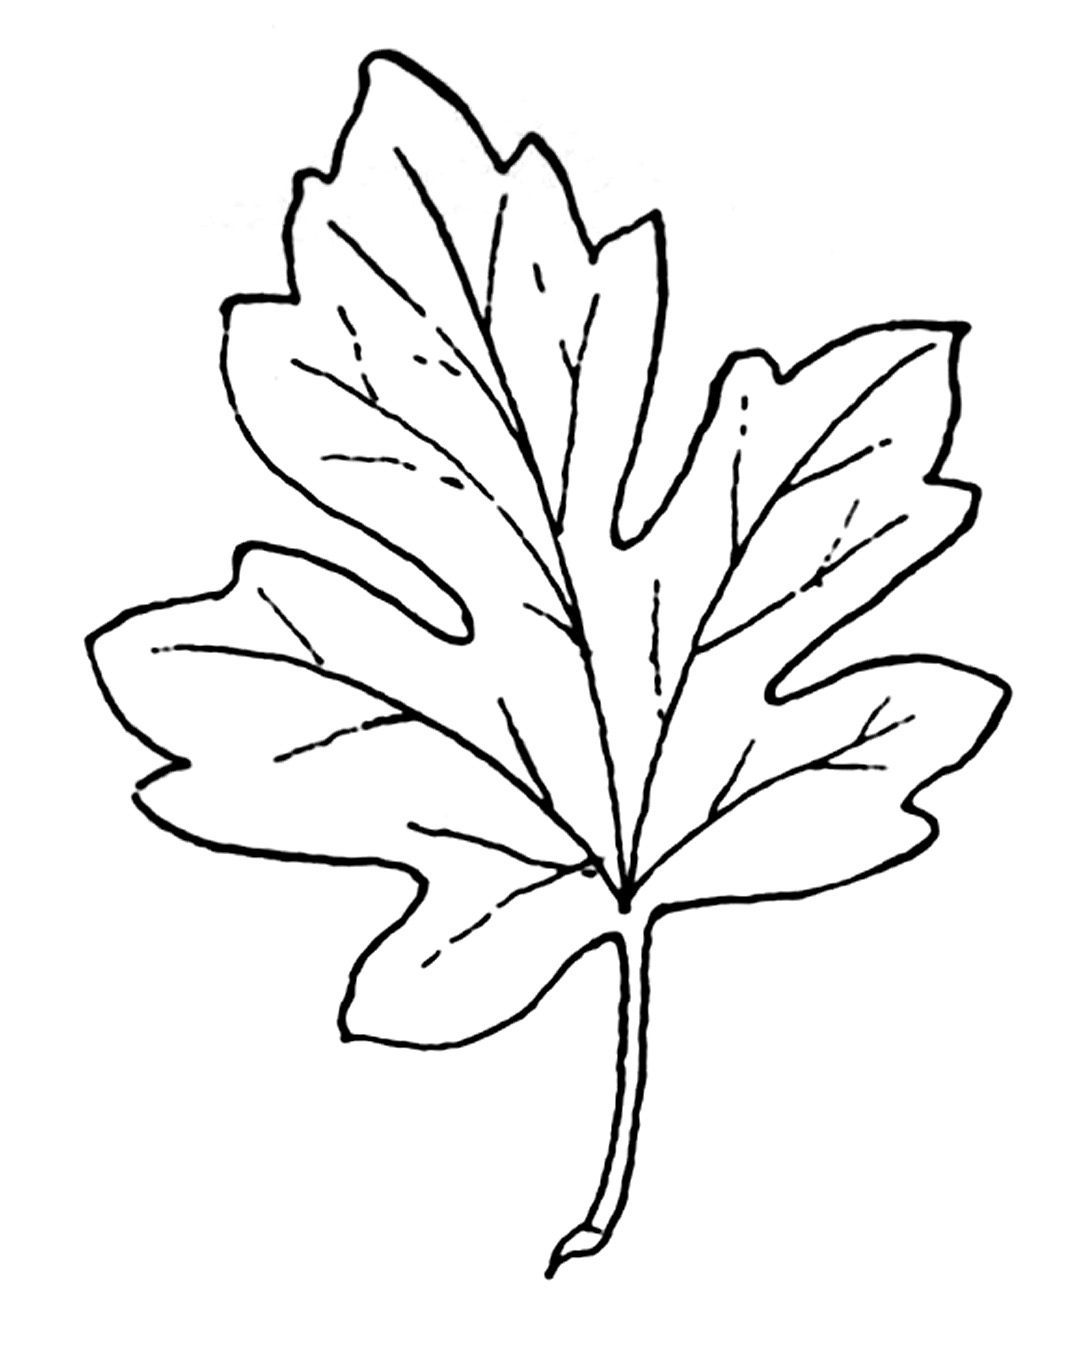 autumn-leaf-outline-drawing-at-getdrawings-free-download